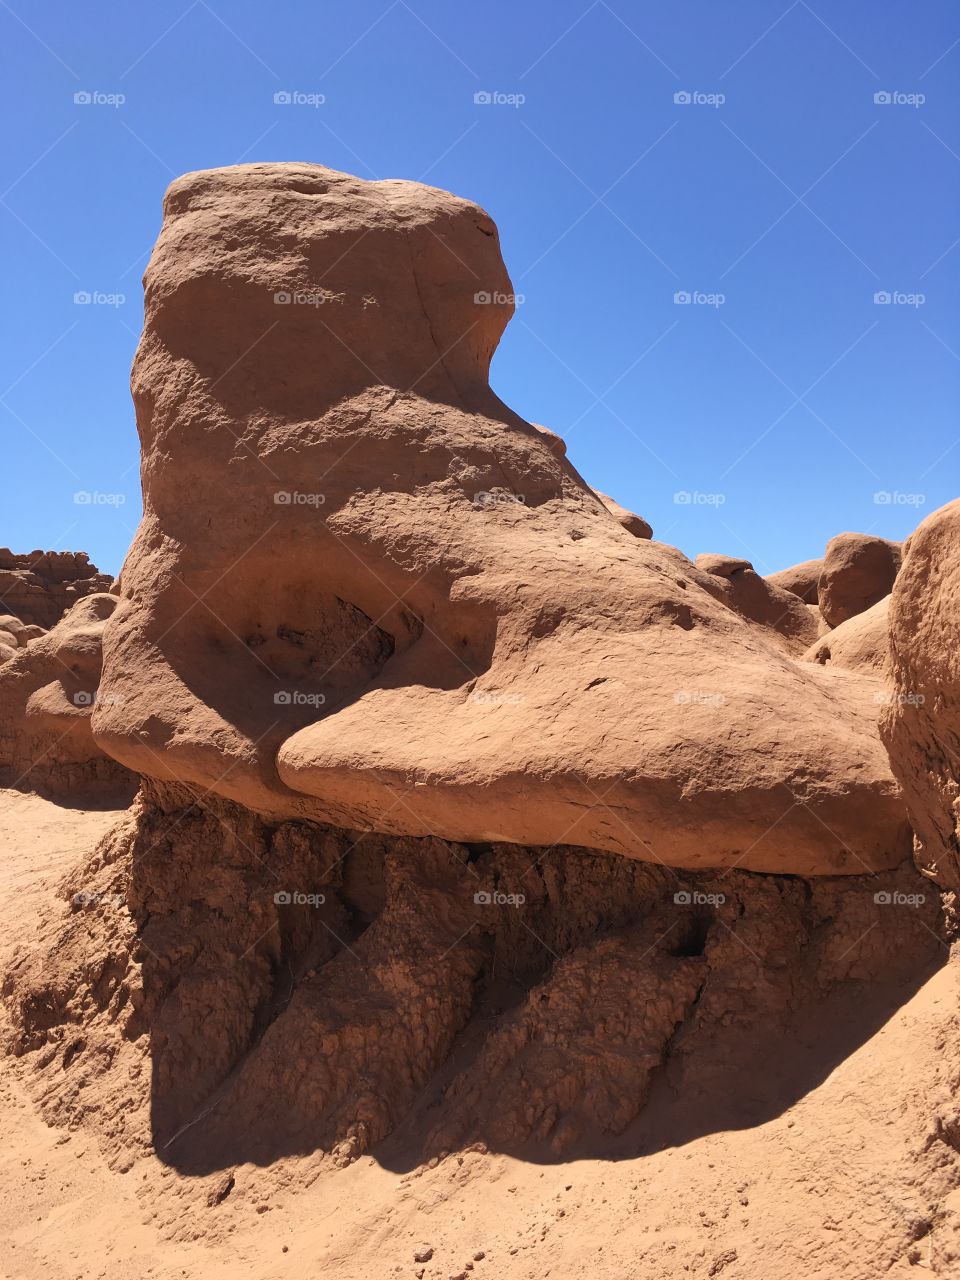 The grant nose of Goblin Valley in Southern Utah.